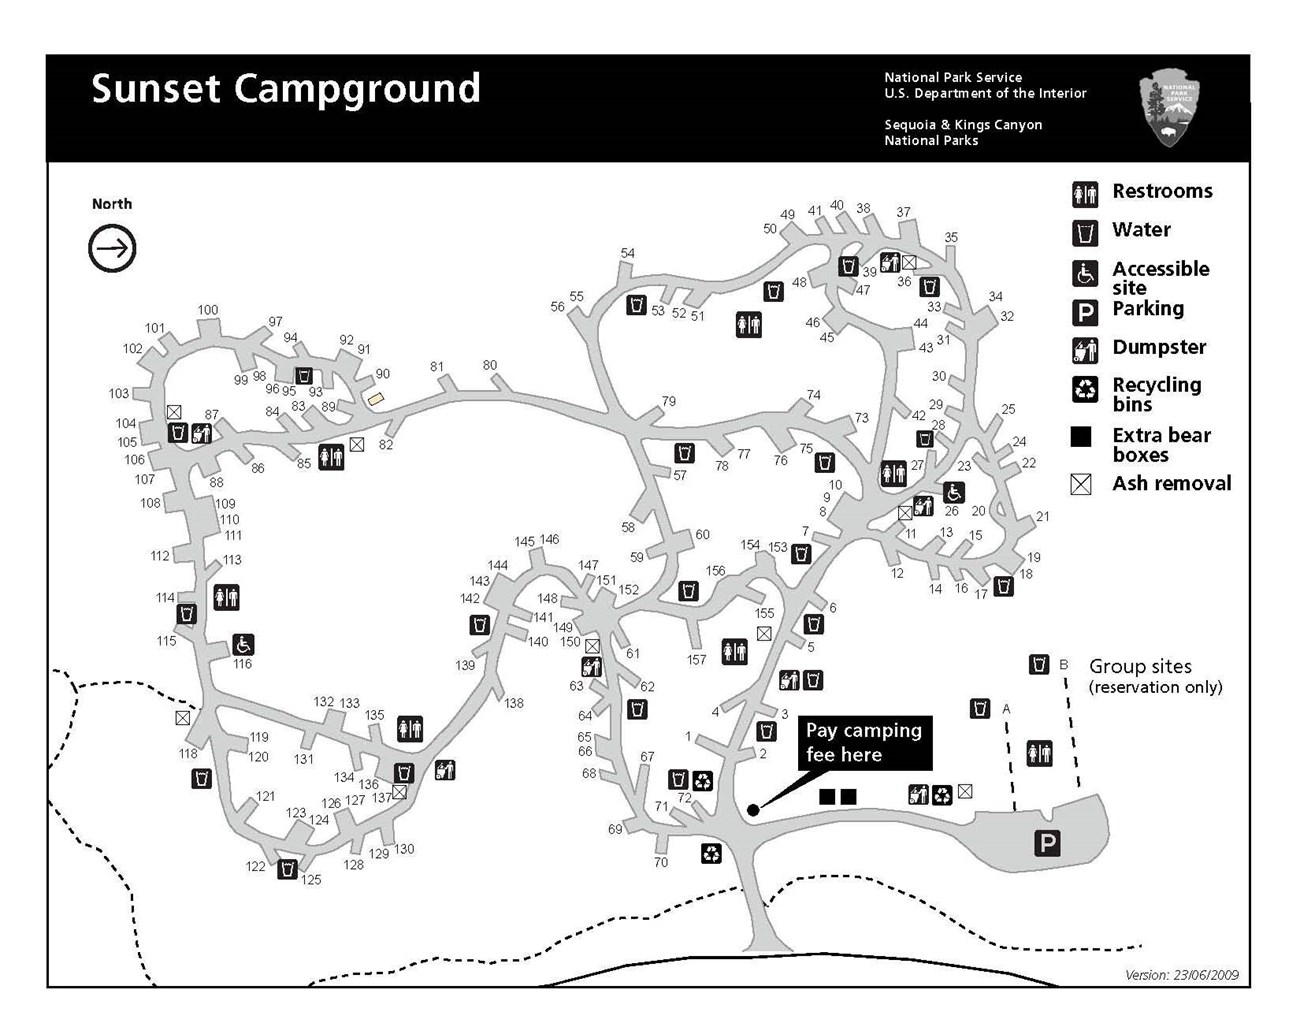 Sunset Campground map, Kings Canyon National Park.